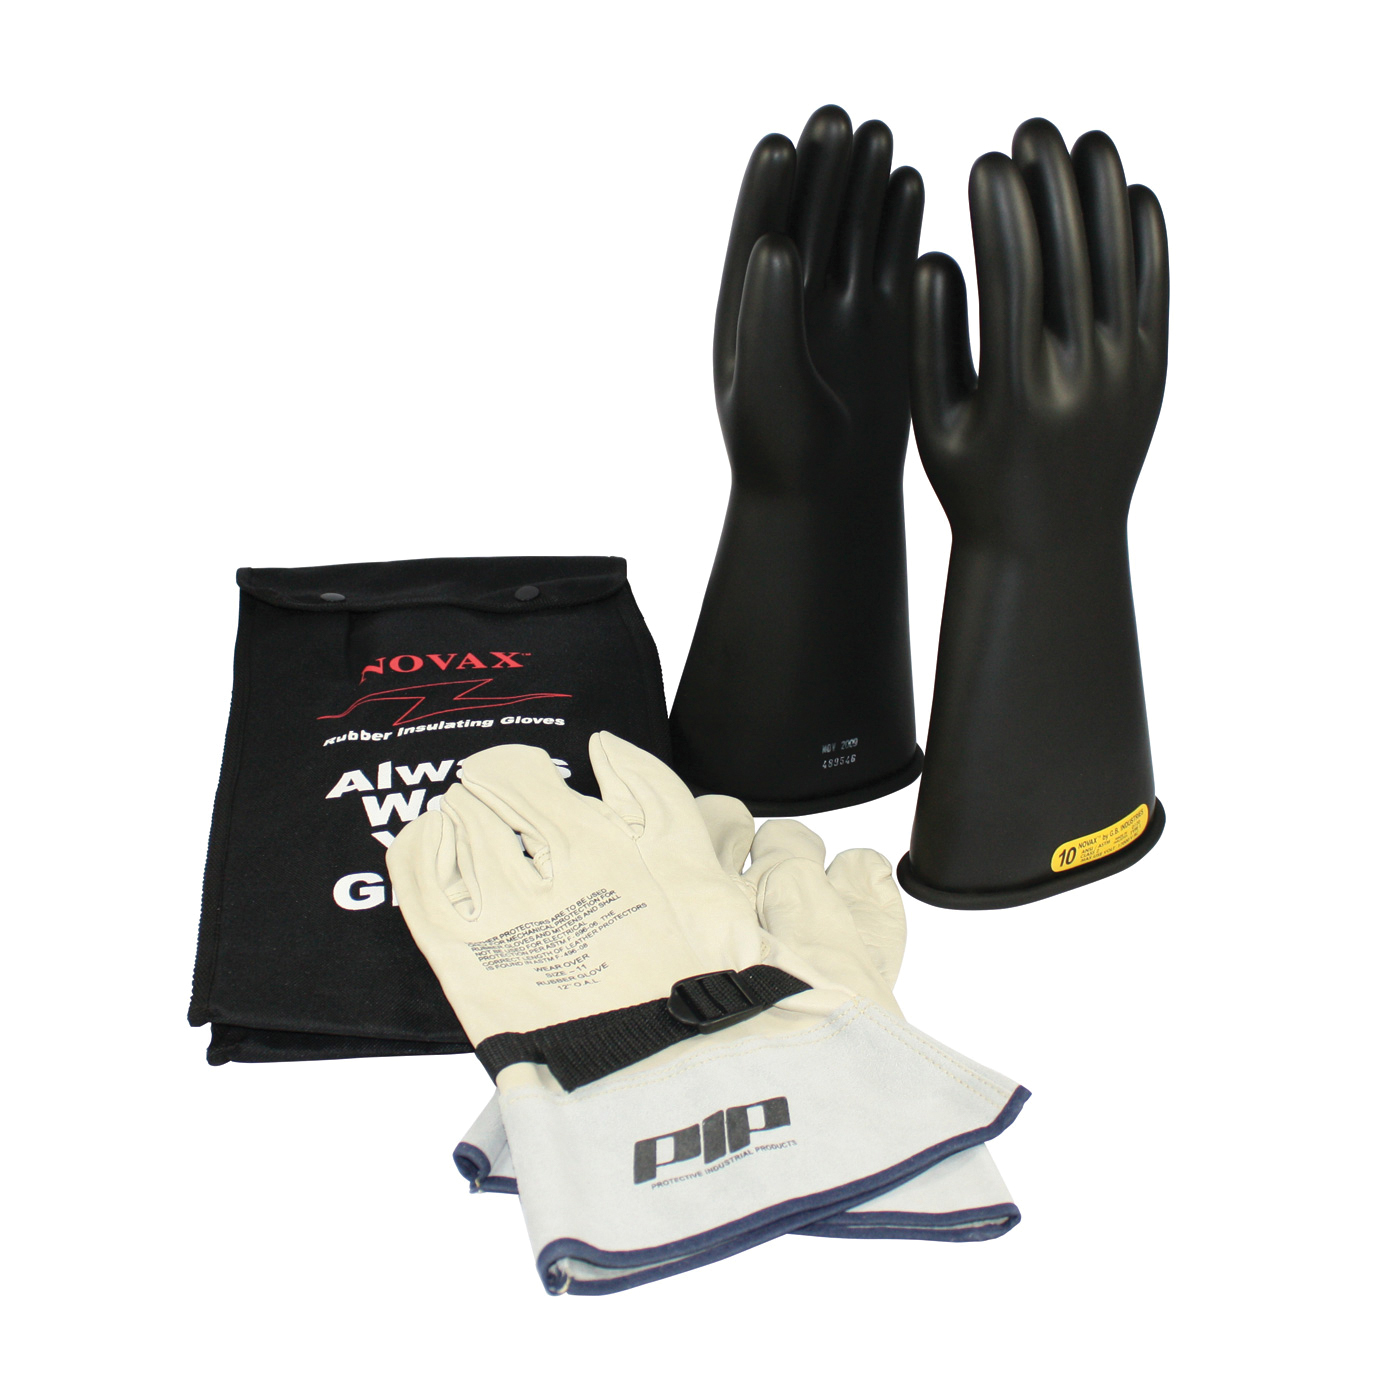 Novax® 150-SK-2/12-KIT Insulating Unisex Electrical Safety Gloves Kit, SZ 12, Cowhide Leather/Natural Rubber, Black/Natural, 14 in L, ASTM Class: Class 2, 17000 VAC, 25500 VDC Max Use Voltage